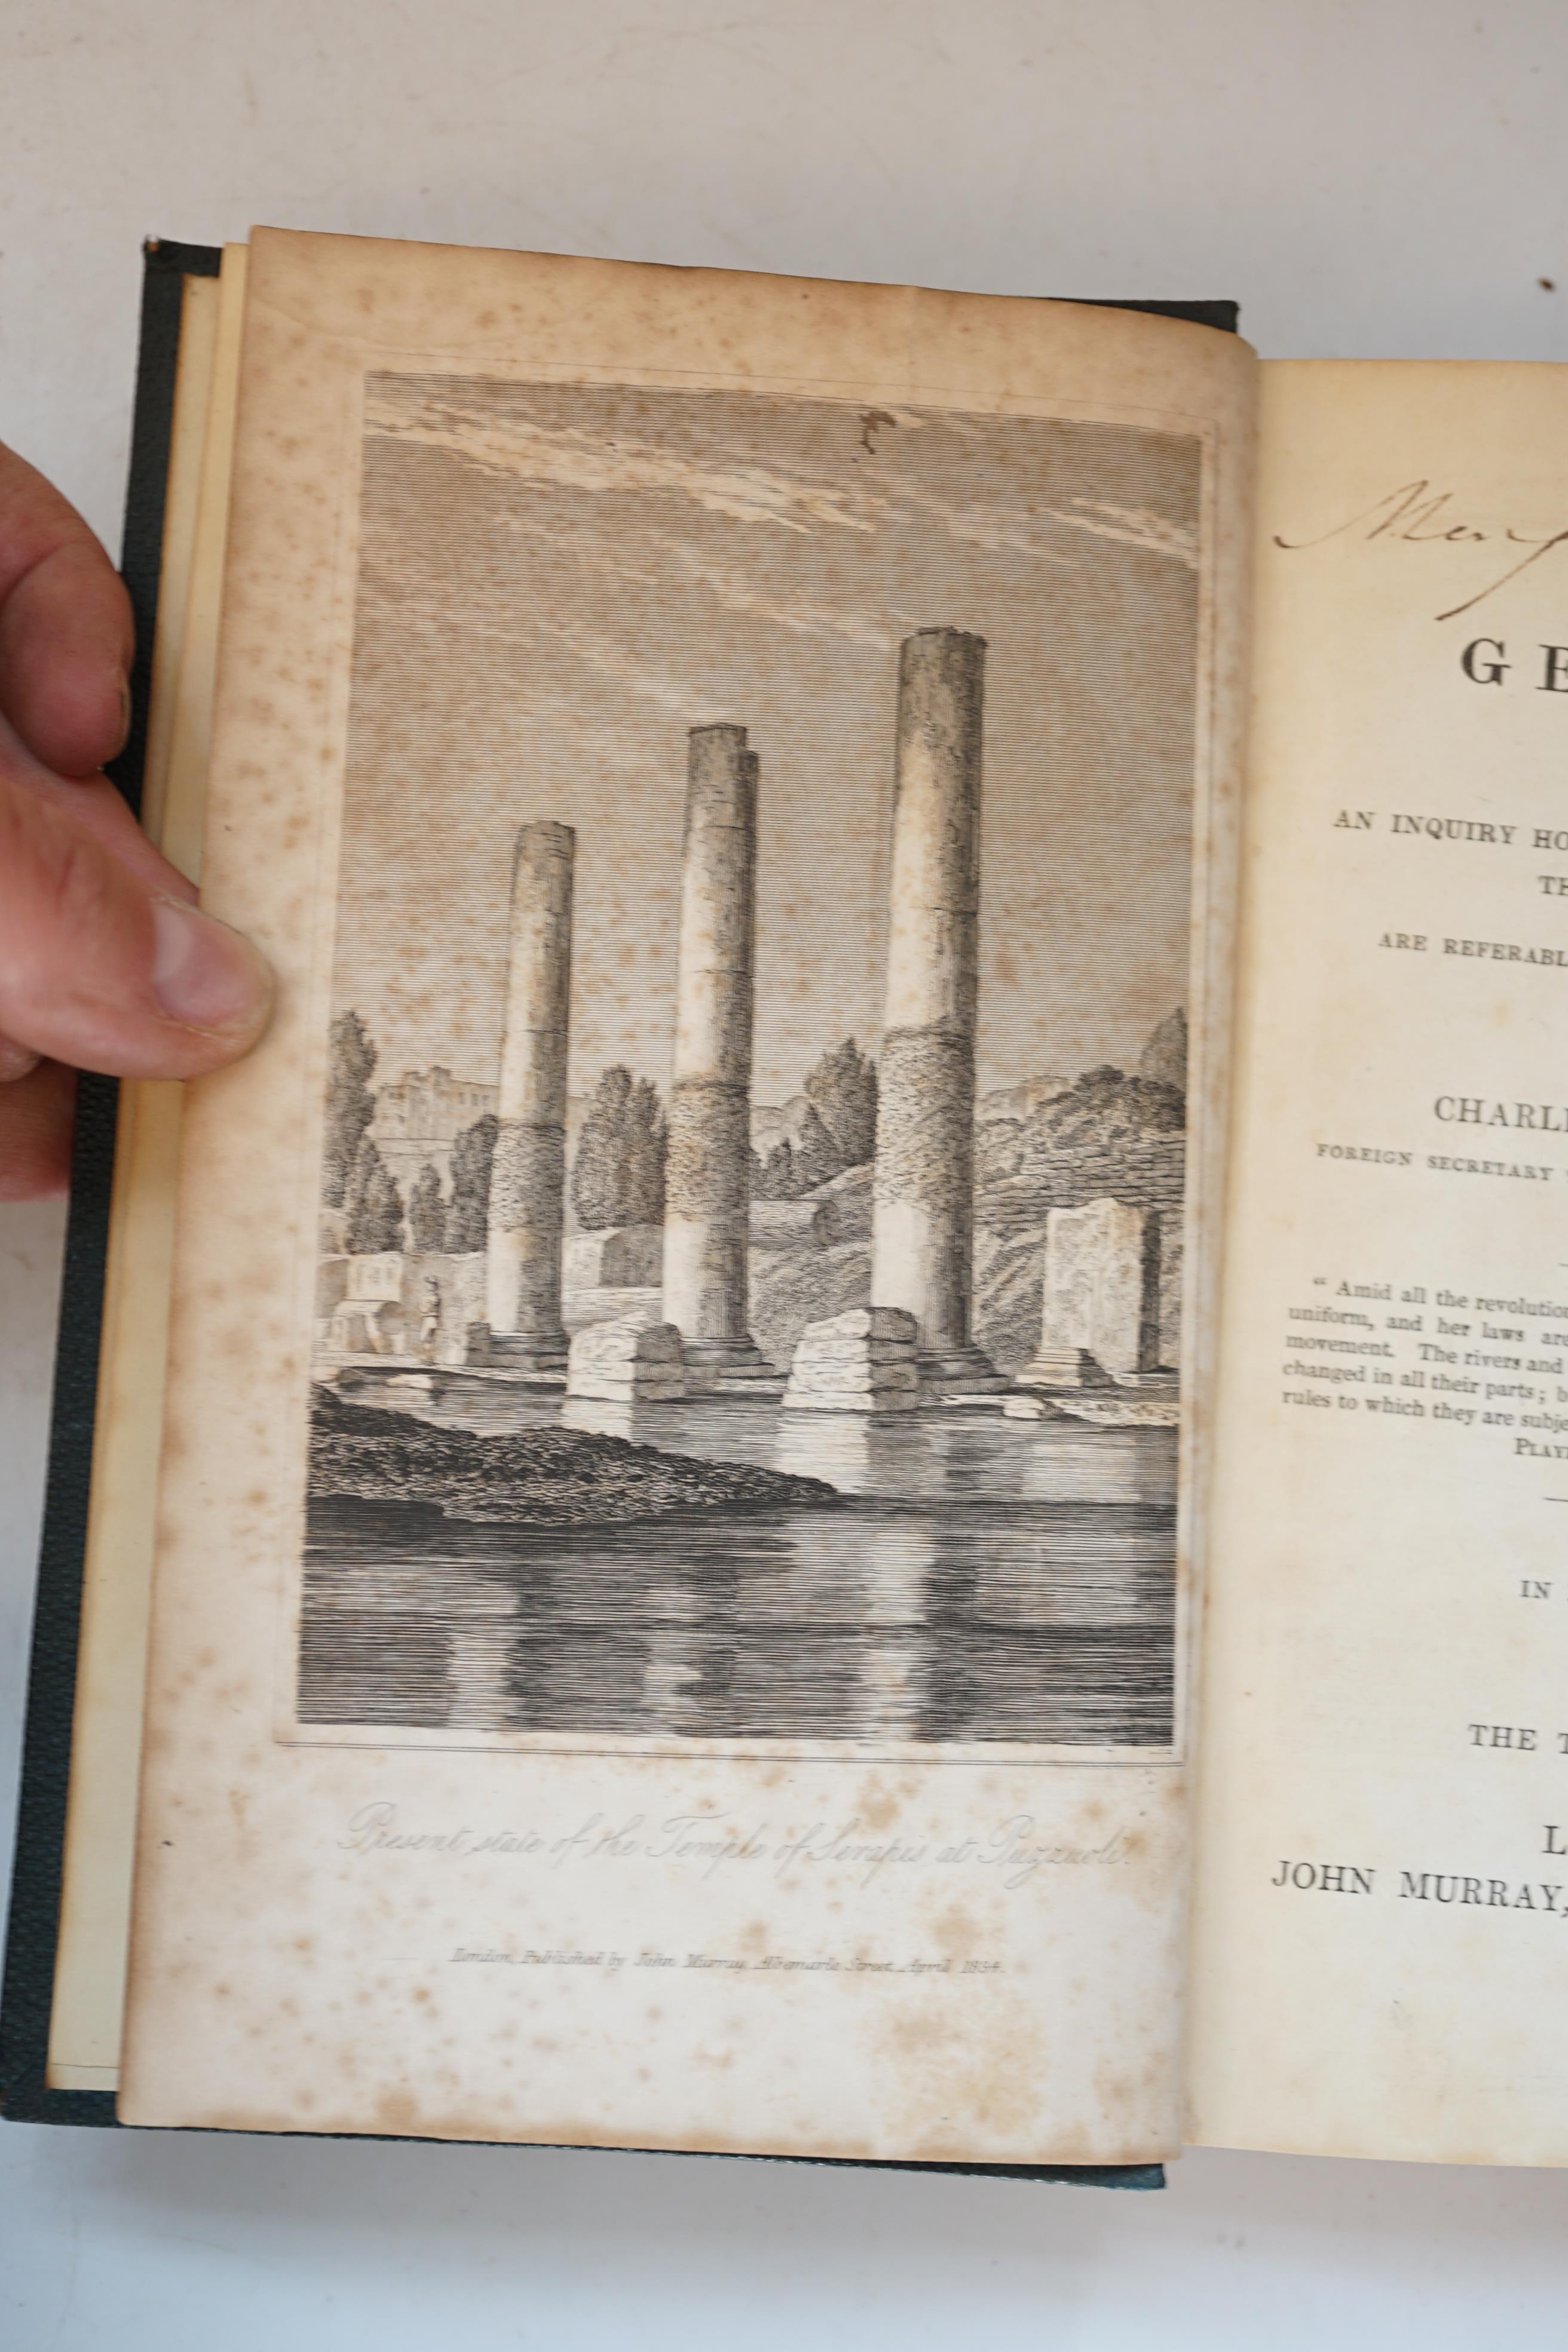 Lyell, Charles - Principles of Geology: being an inquiry how far the former changes of the Earth's surface are referable to causes now in operation, 4 volumes, 3rd edition, 8vo, green cloth with gilt spine lettering, 183